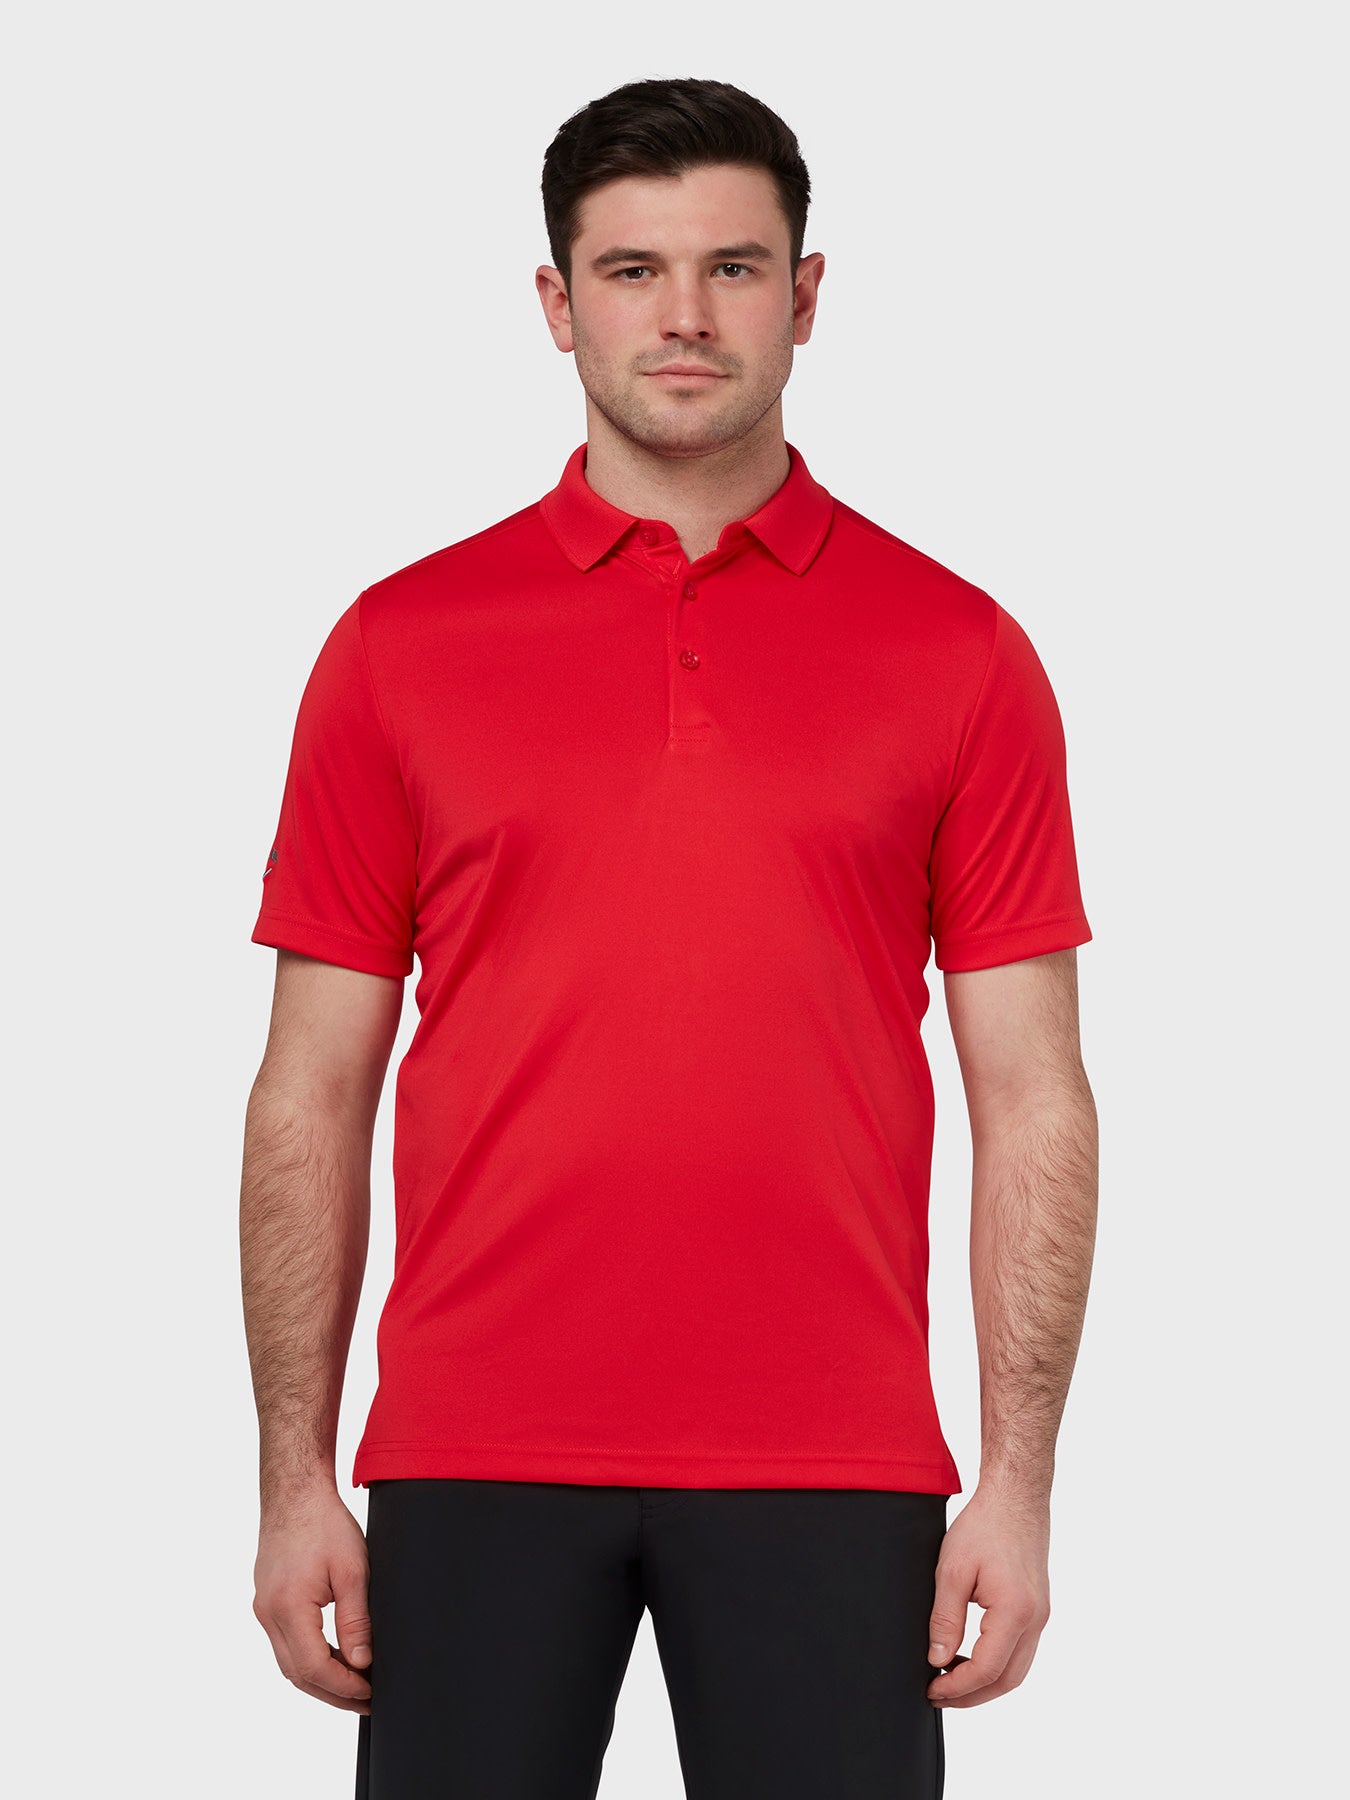 View Tournament Polo In True Red True Red XL information